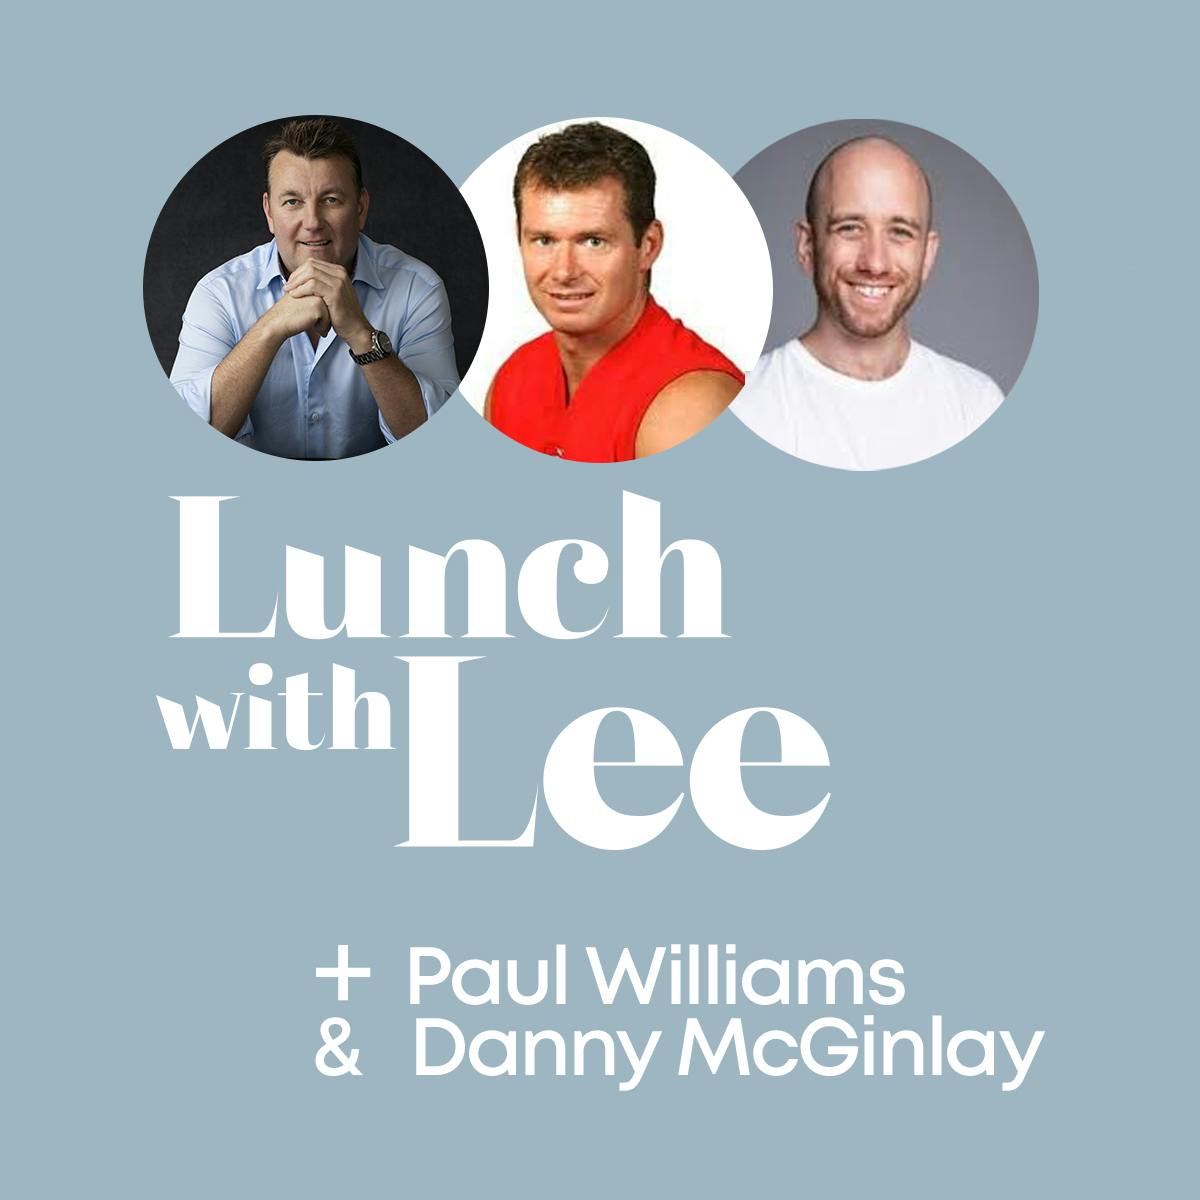 Lunch with Paul Williams & Danny McGinlay